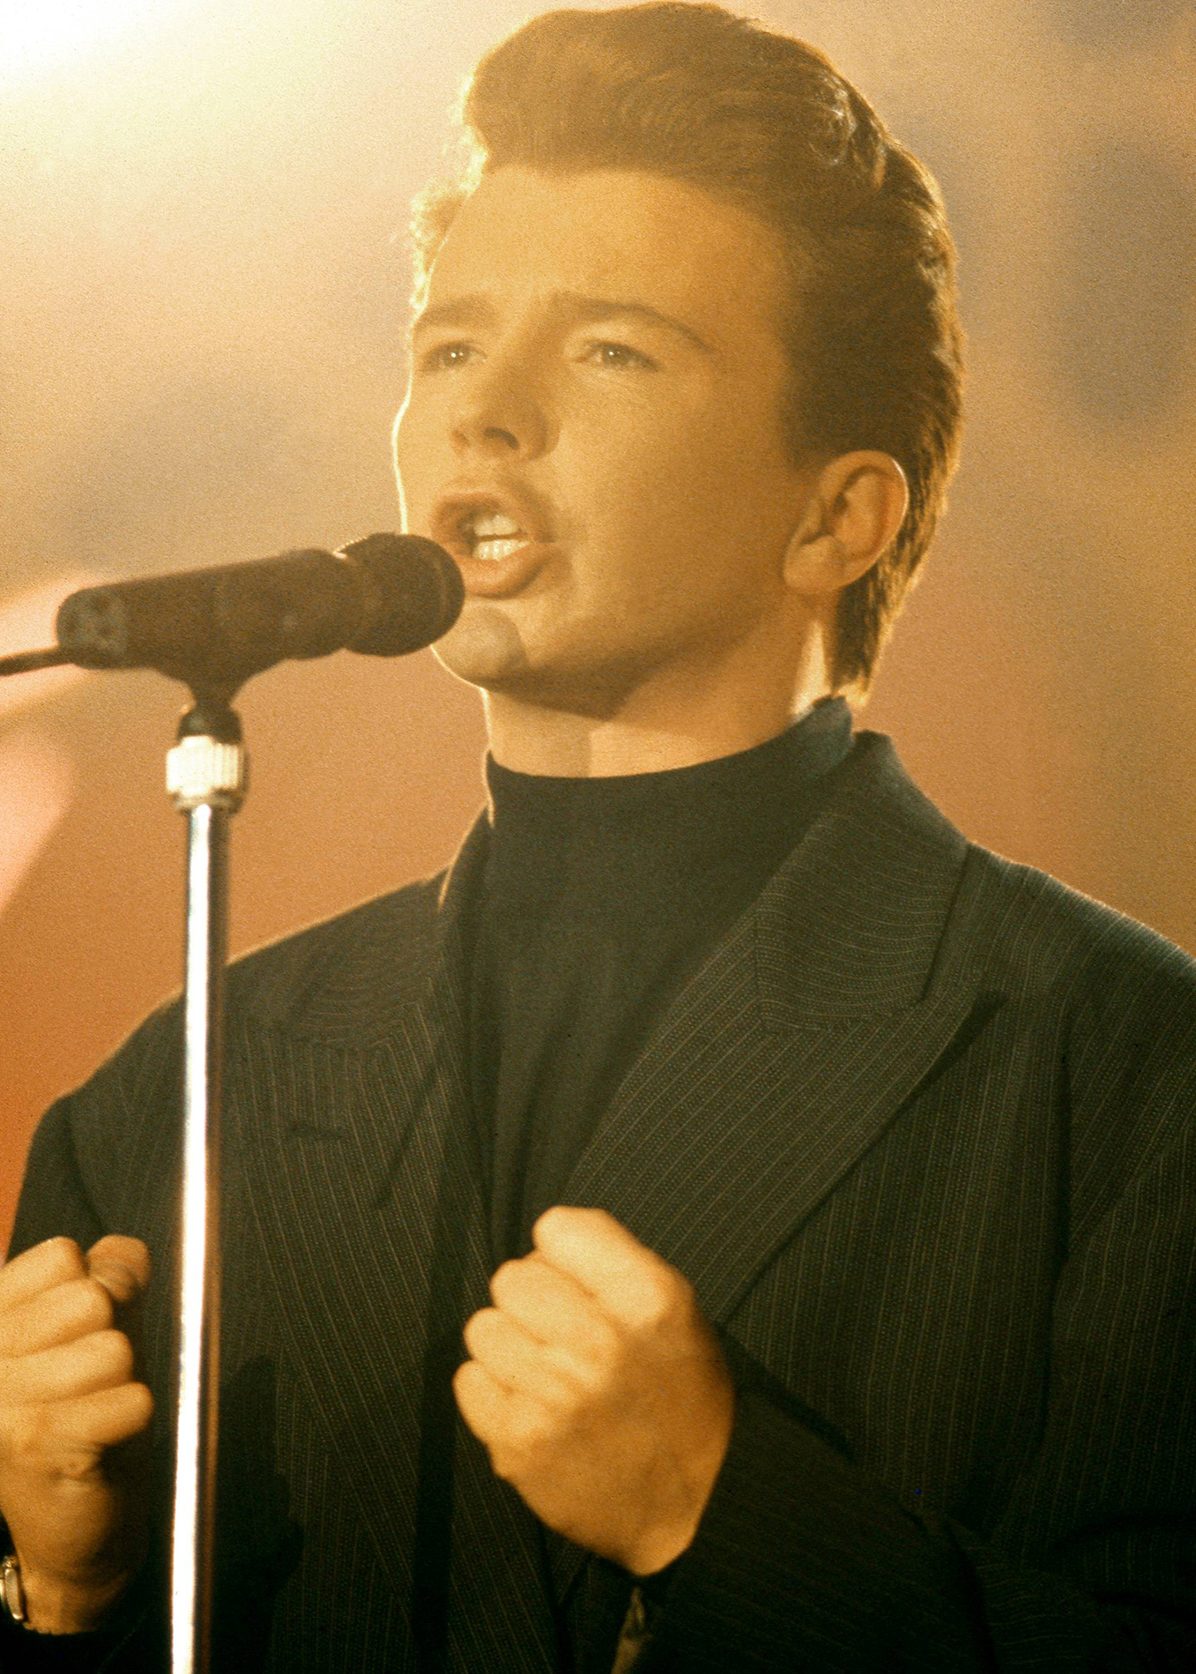 English Pop Star Rick Astley Touring in U.S. for First Time Since '89 ...